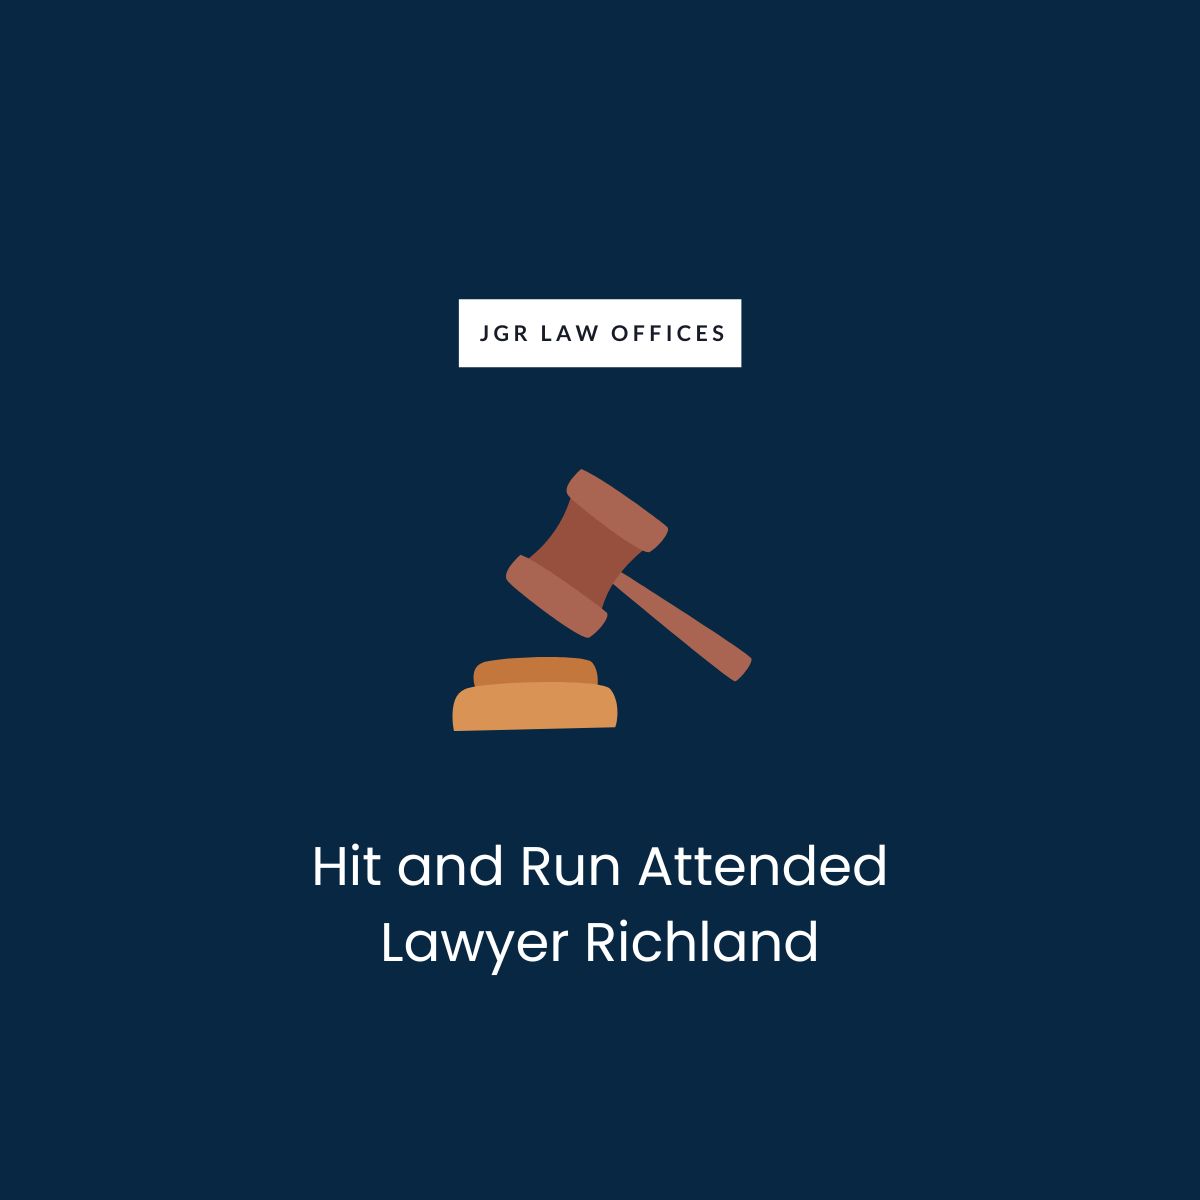 Hit and Run Attended Attorney Richland